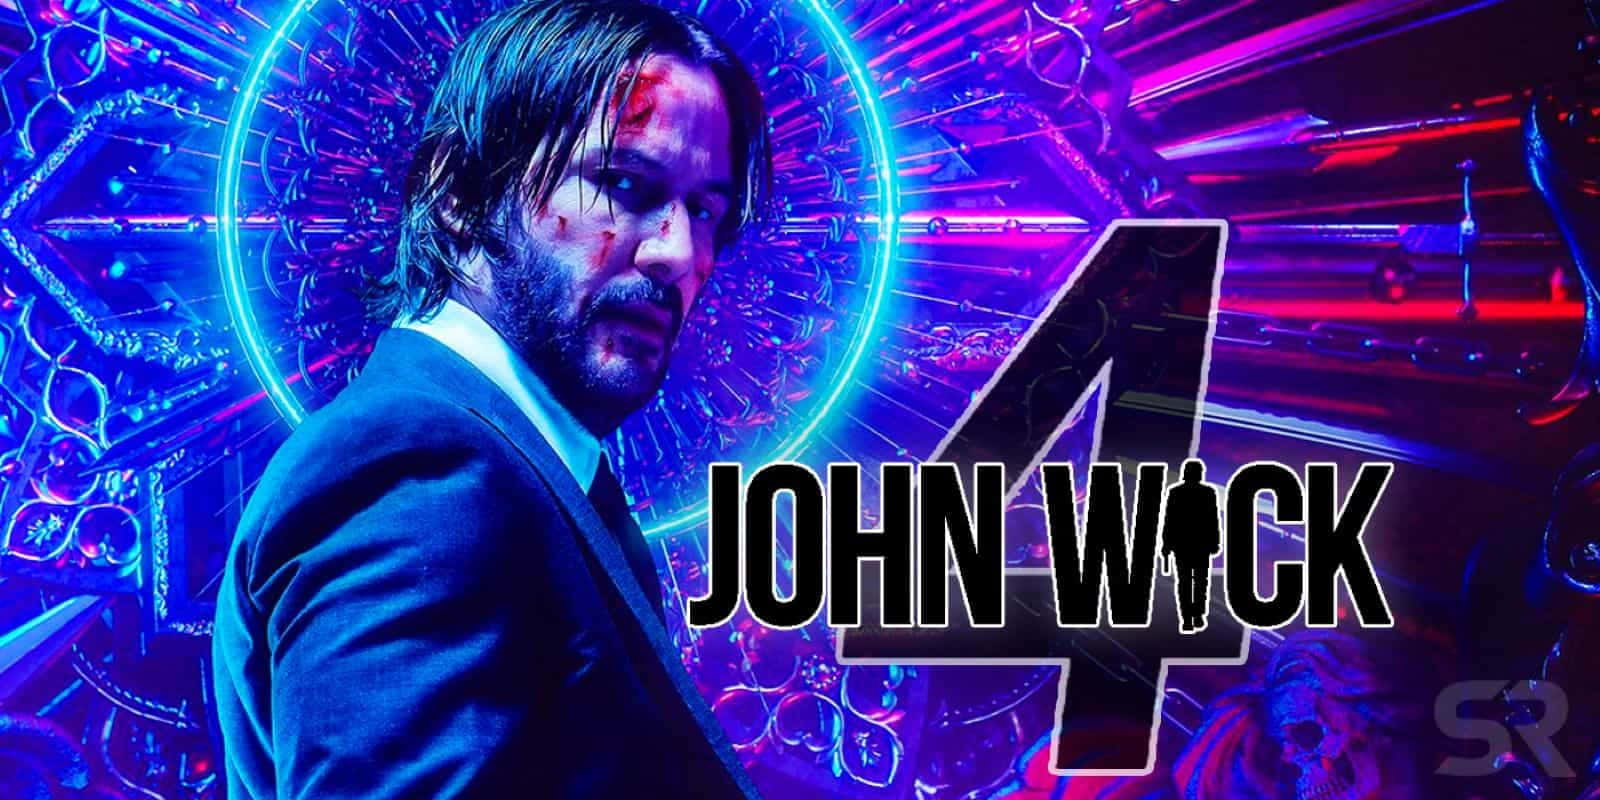 Keanu Reeves stars as John Wick in the highly anticipated new movie, "John Wick 4". Wallpaper